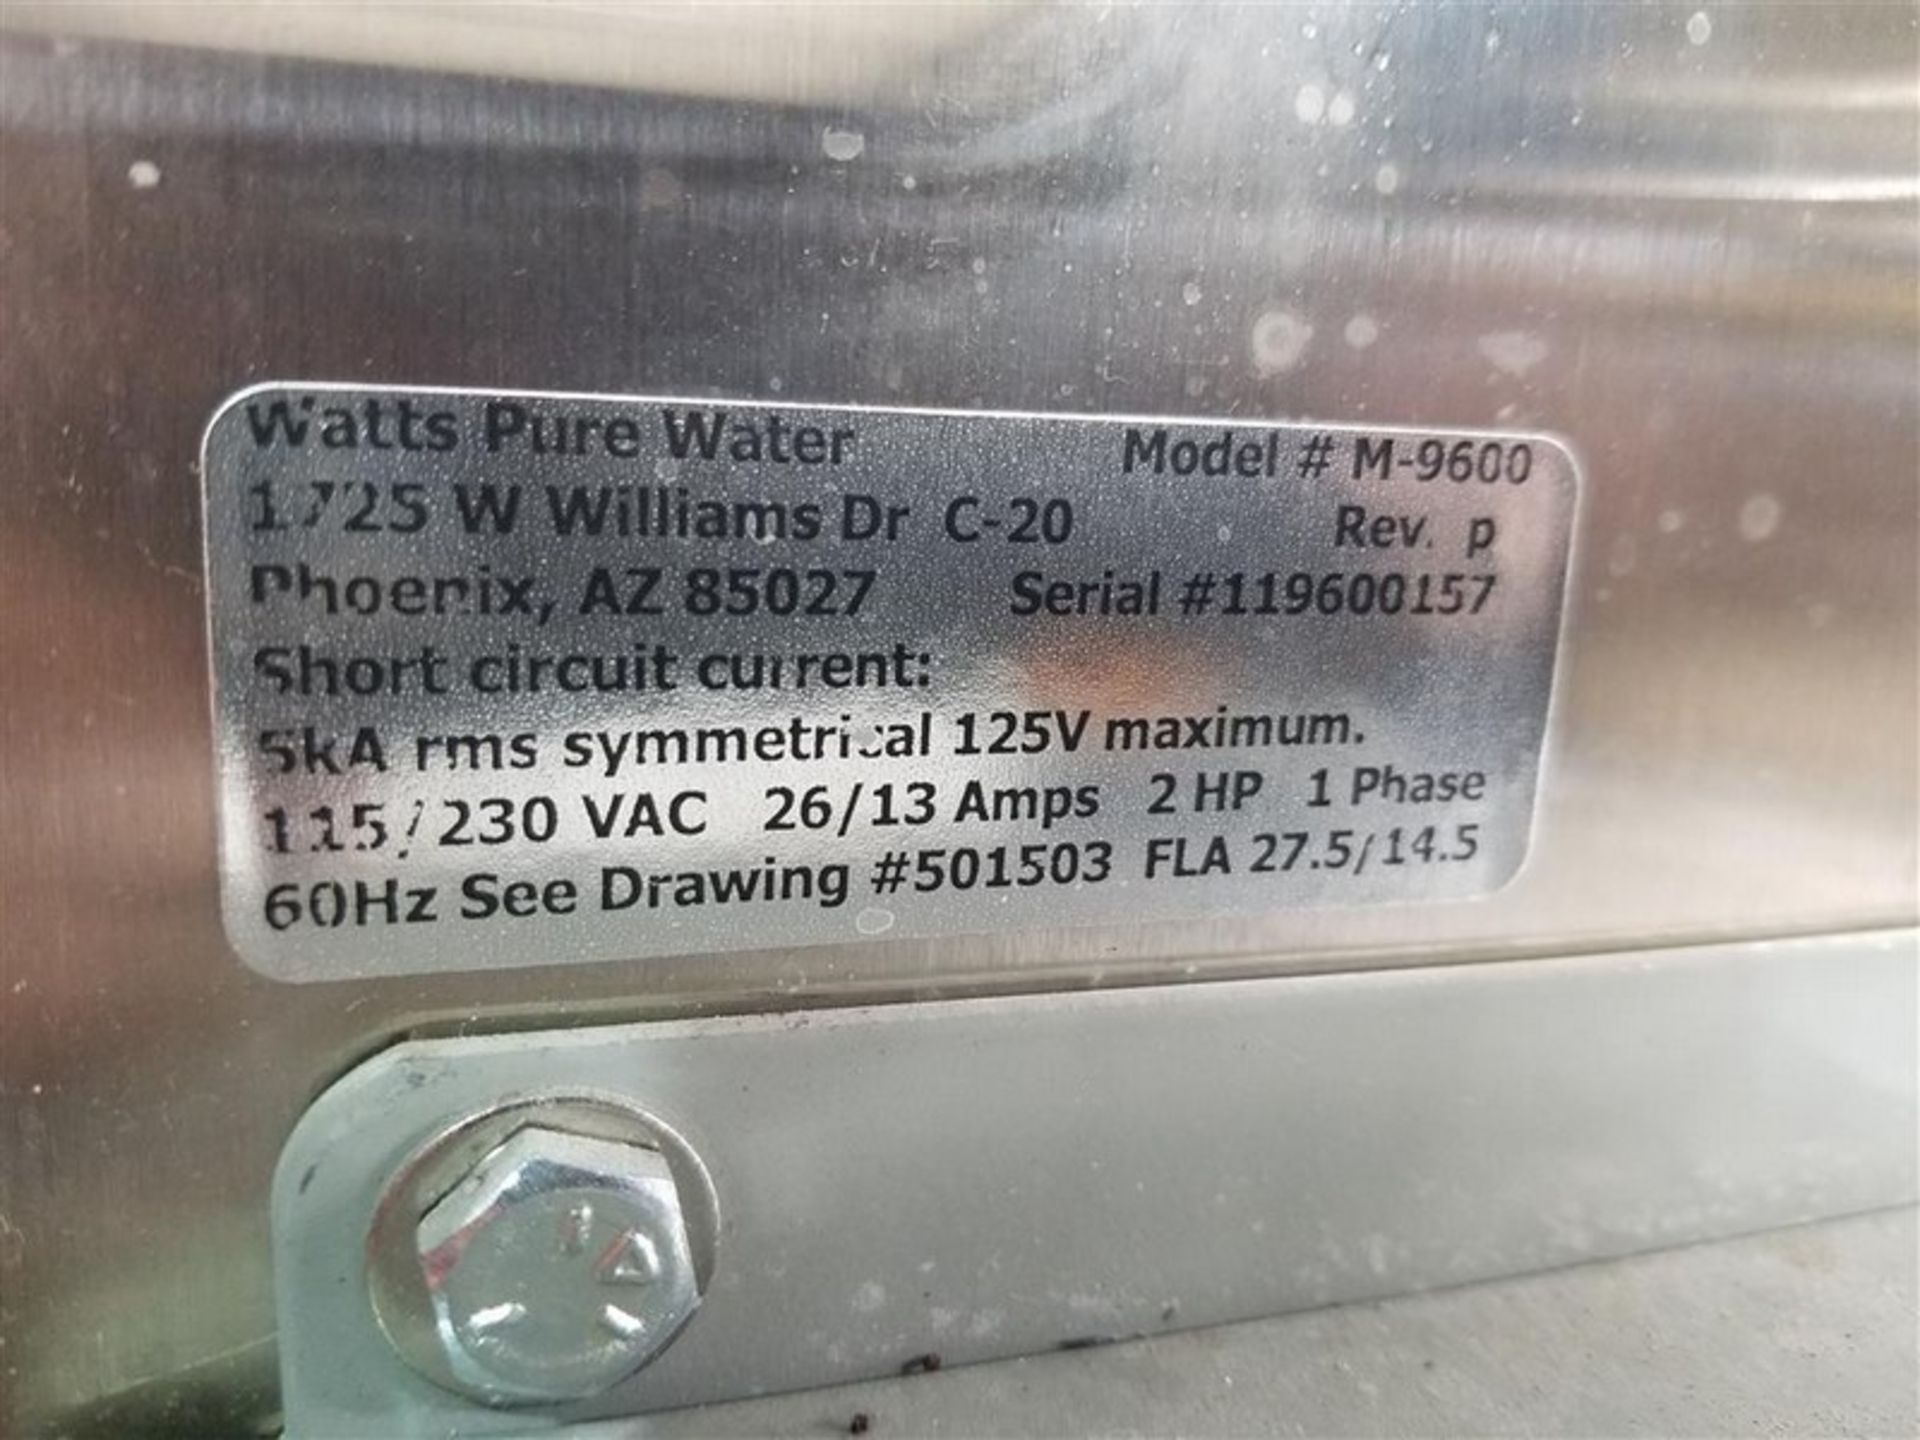 Watts Pure Water Deionizer, Model M-9600, S/N 119600157, Volt 115/230, Single Phase, 2 Hrs., Like - Image 7 of 7